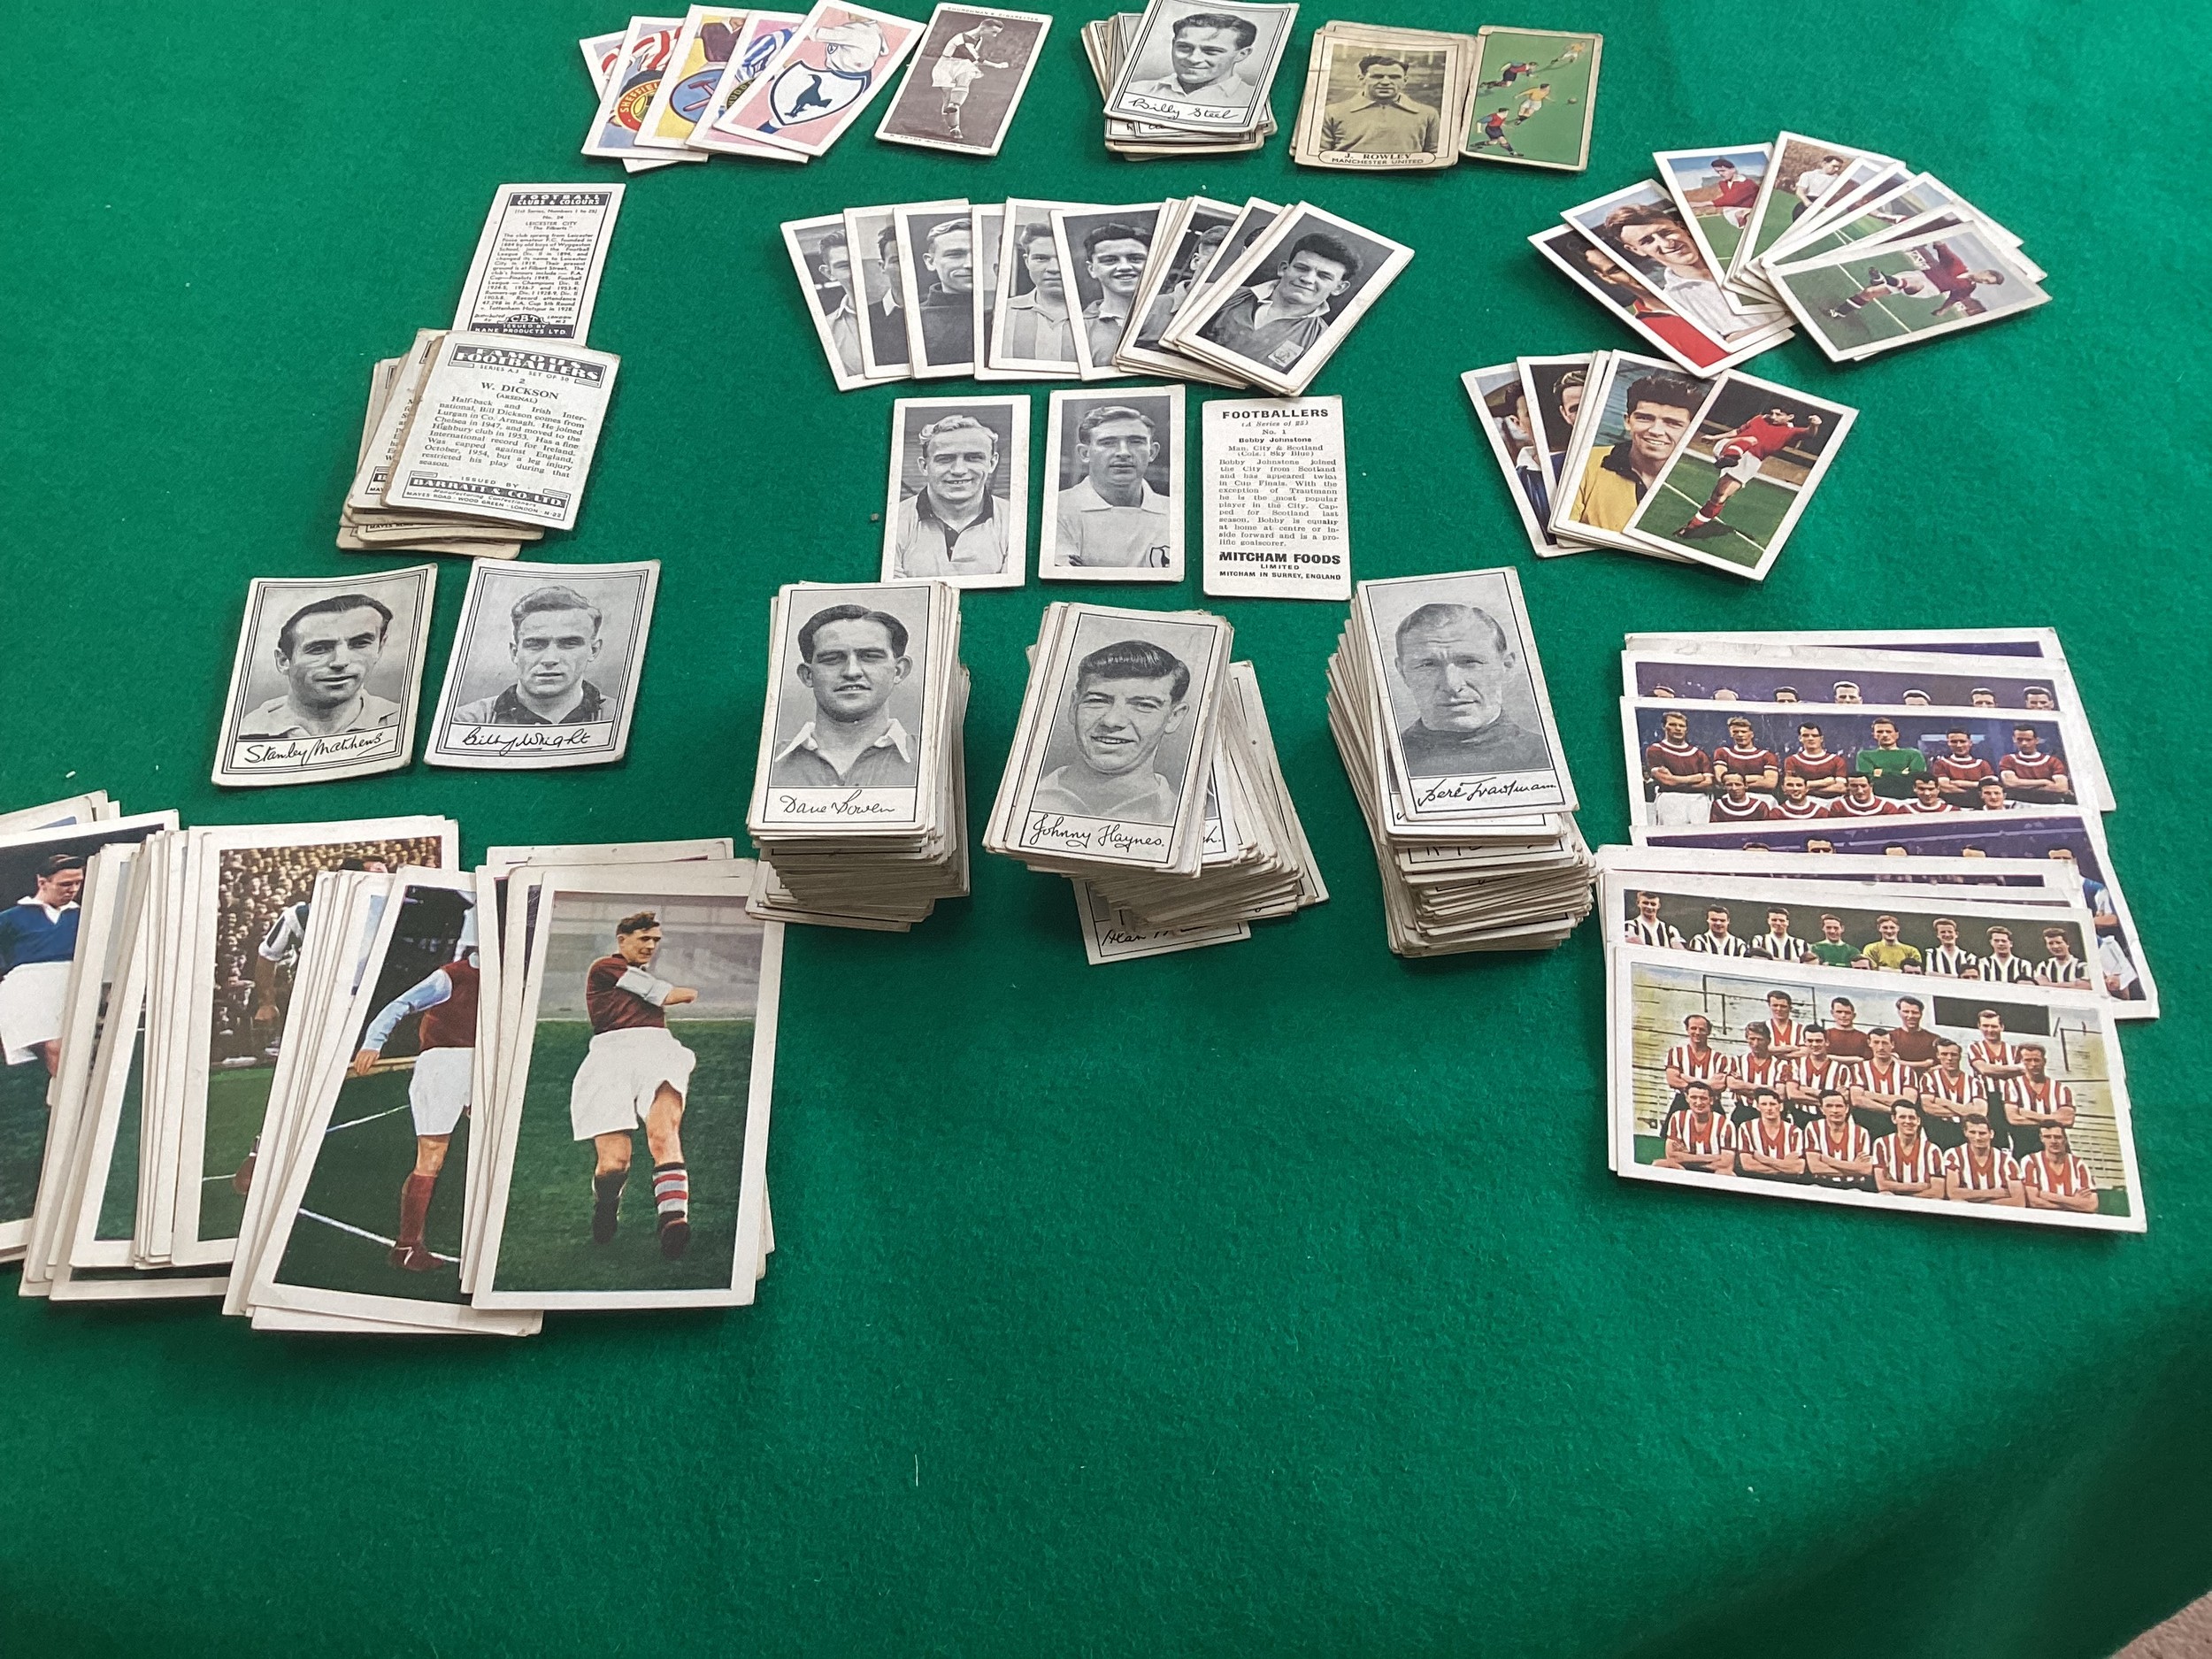 More than 250 collectable confectionary from the Barratt & Co Famous Footballers 1950s series plus